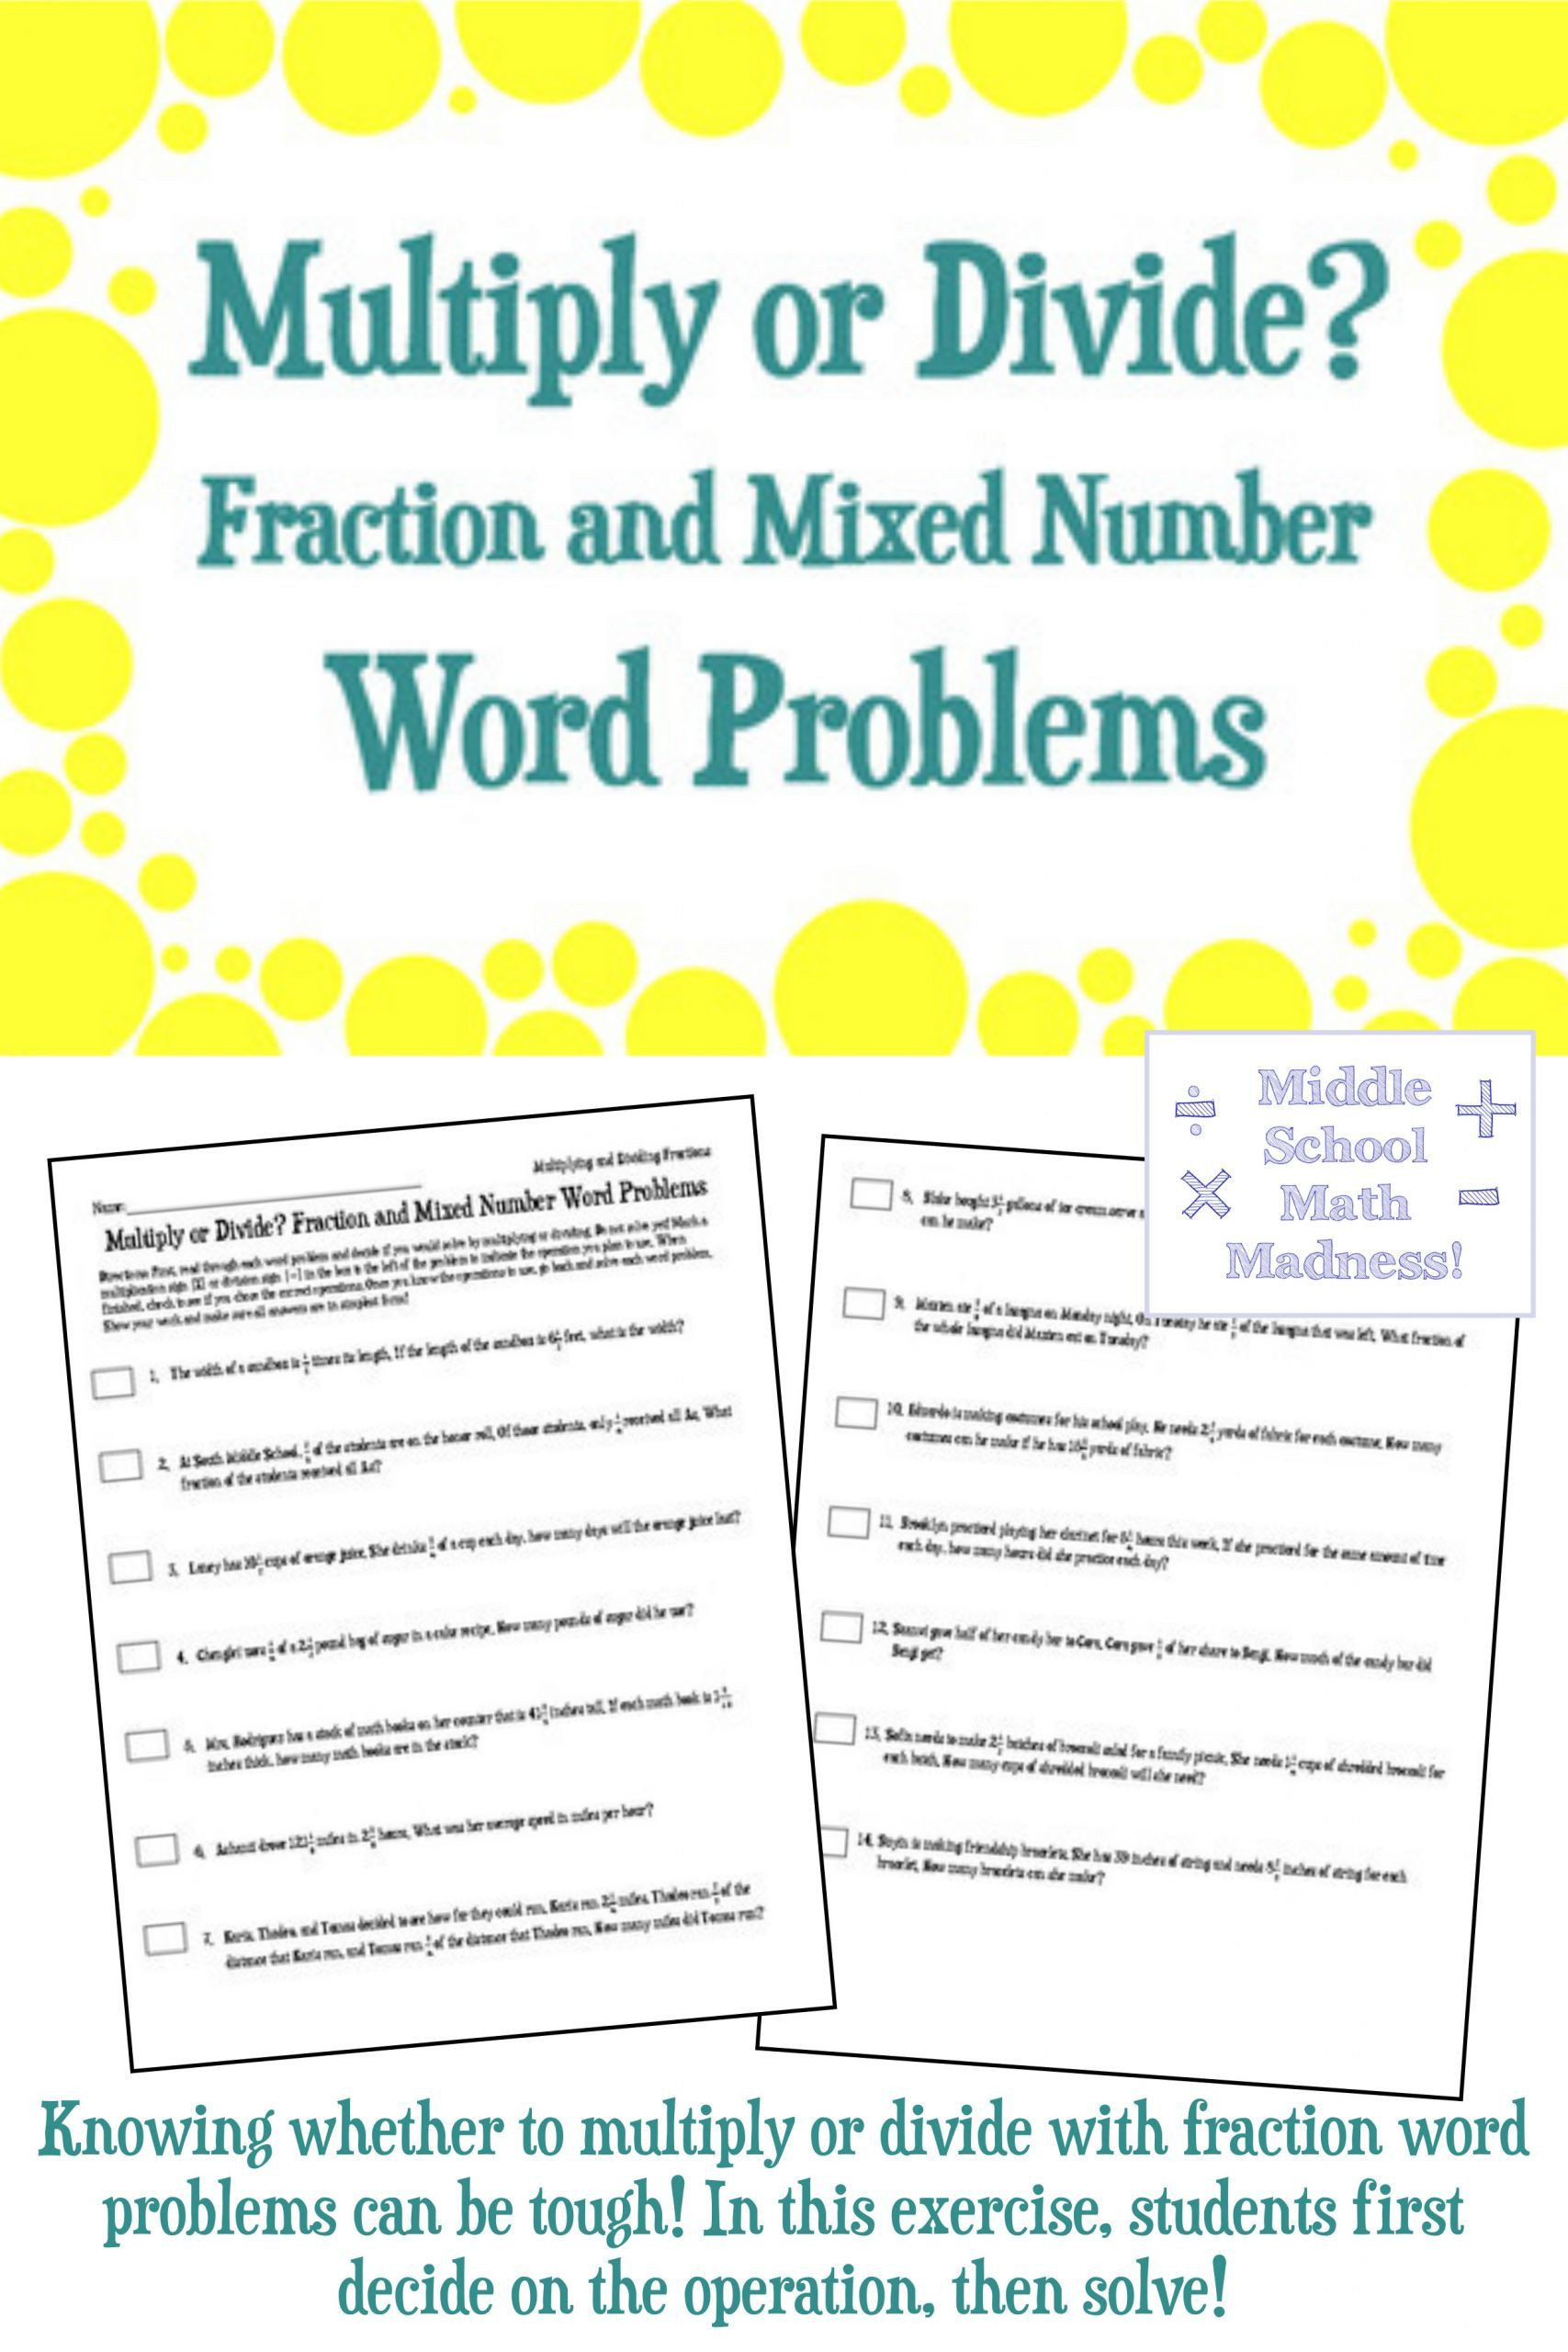 Dividing Fractions Word Problems Worksheet 5 Fraction Multiplication Word Problems In 2020